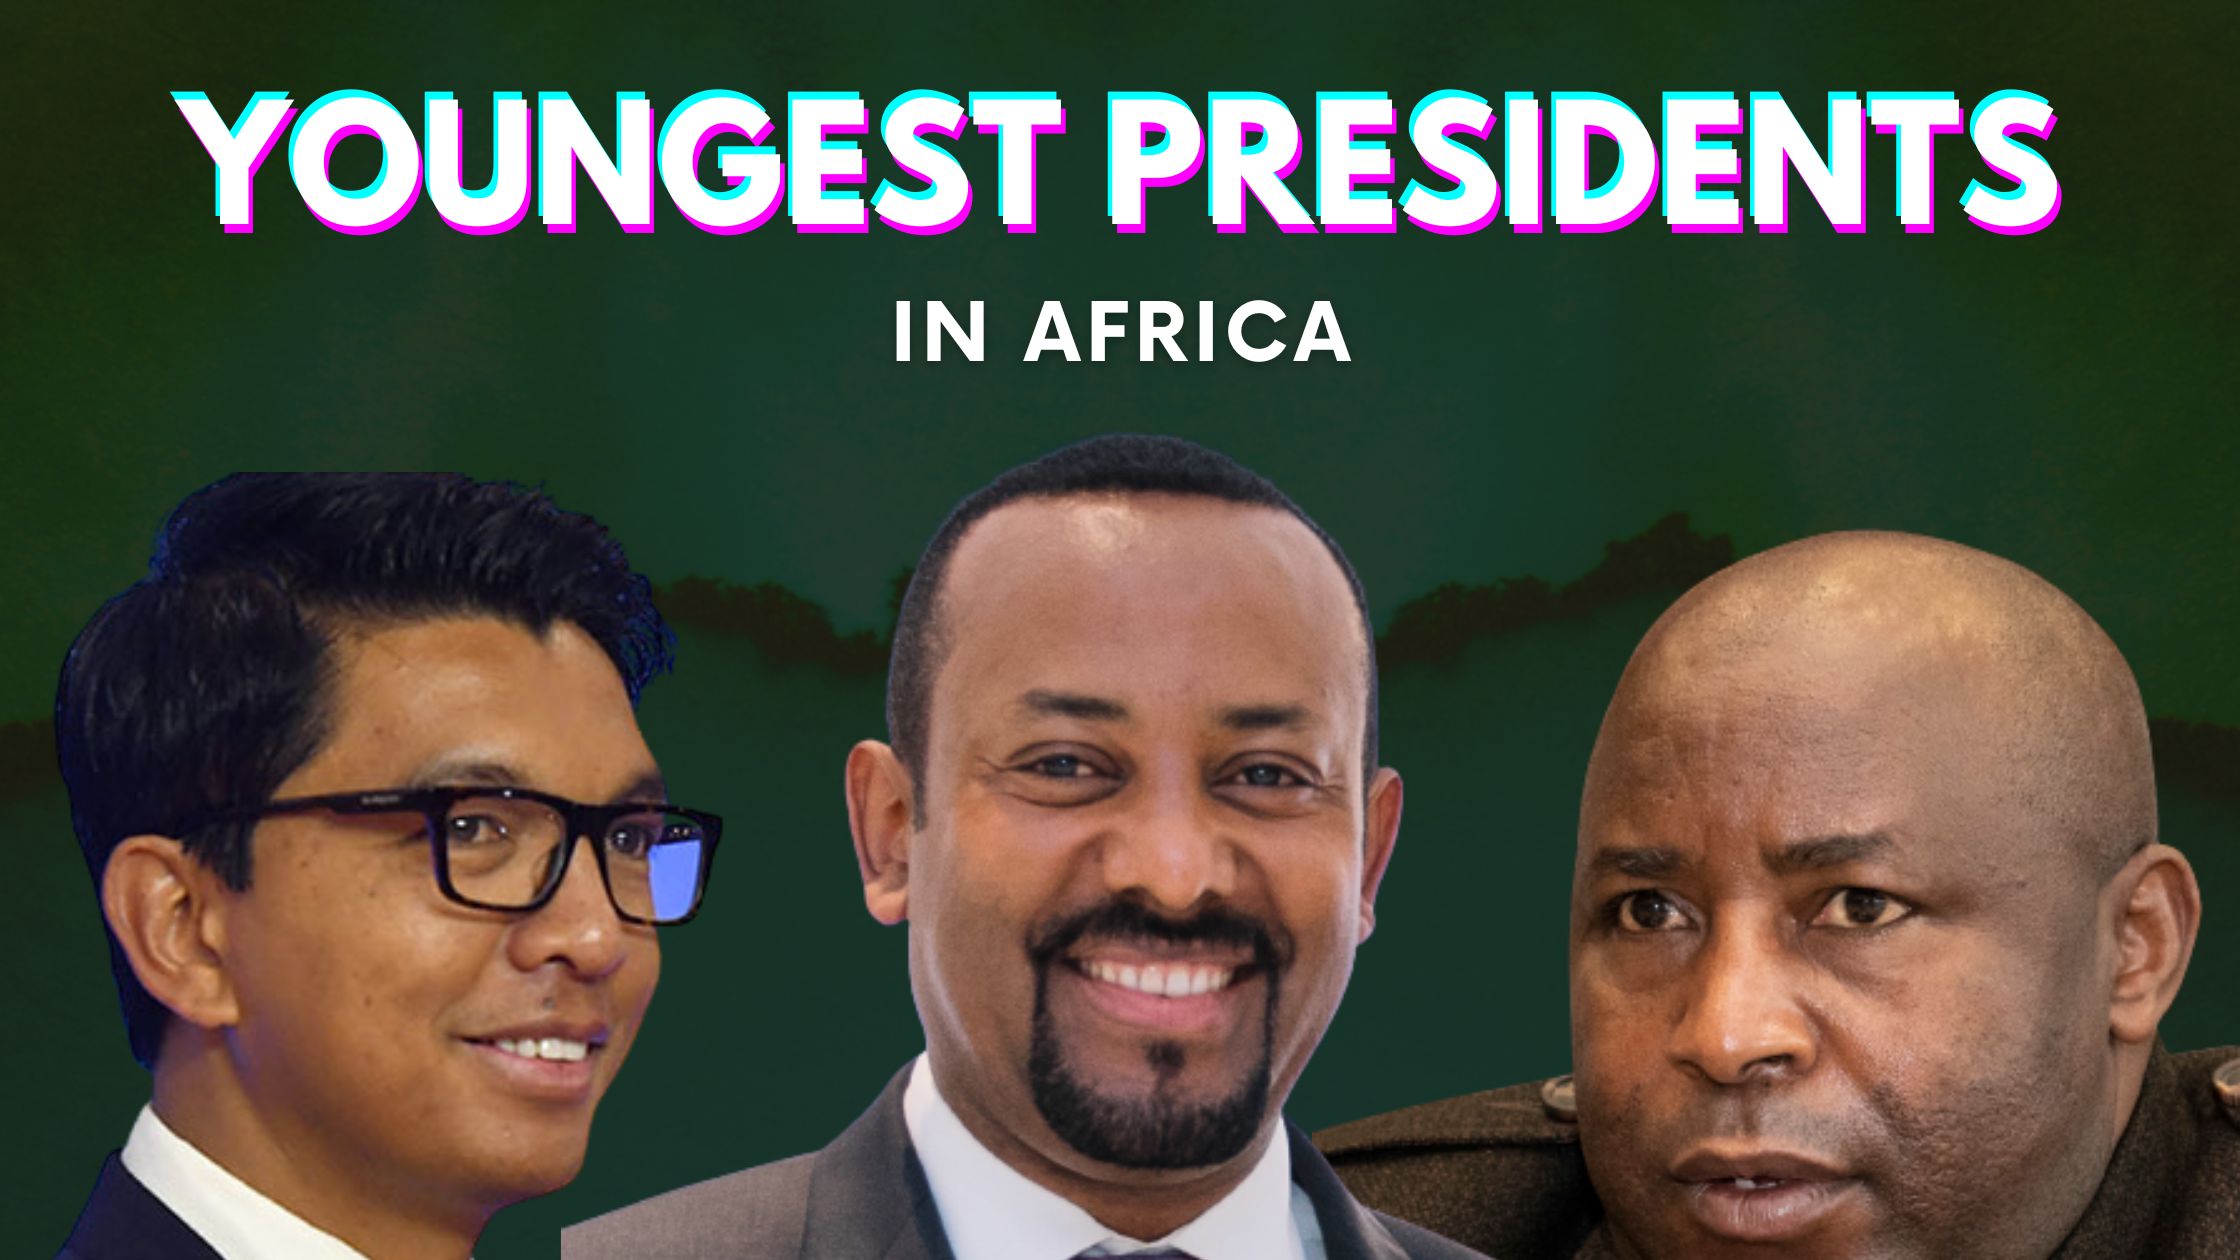 Top 10 Youngest Presidents In Africa (2022)